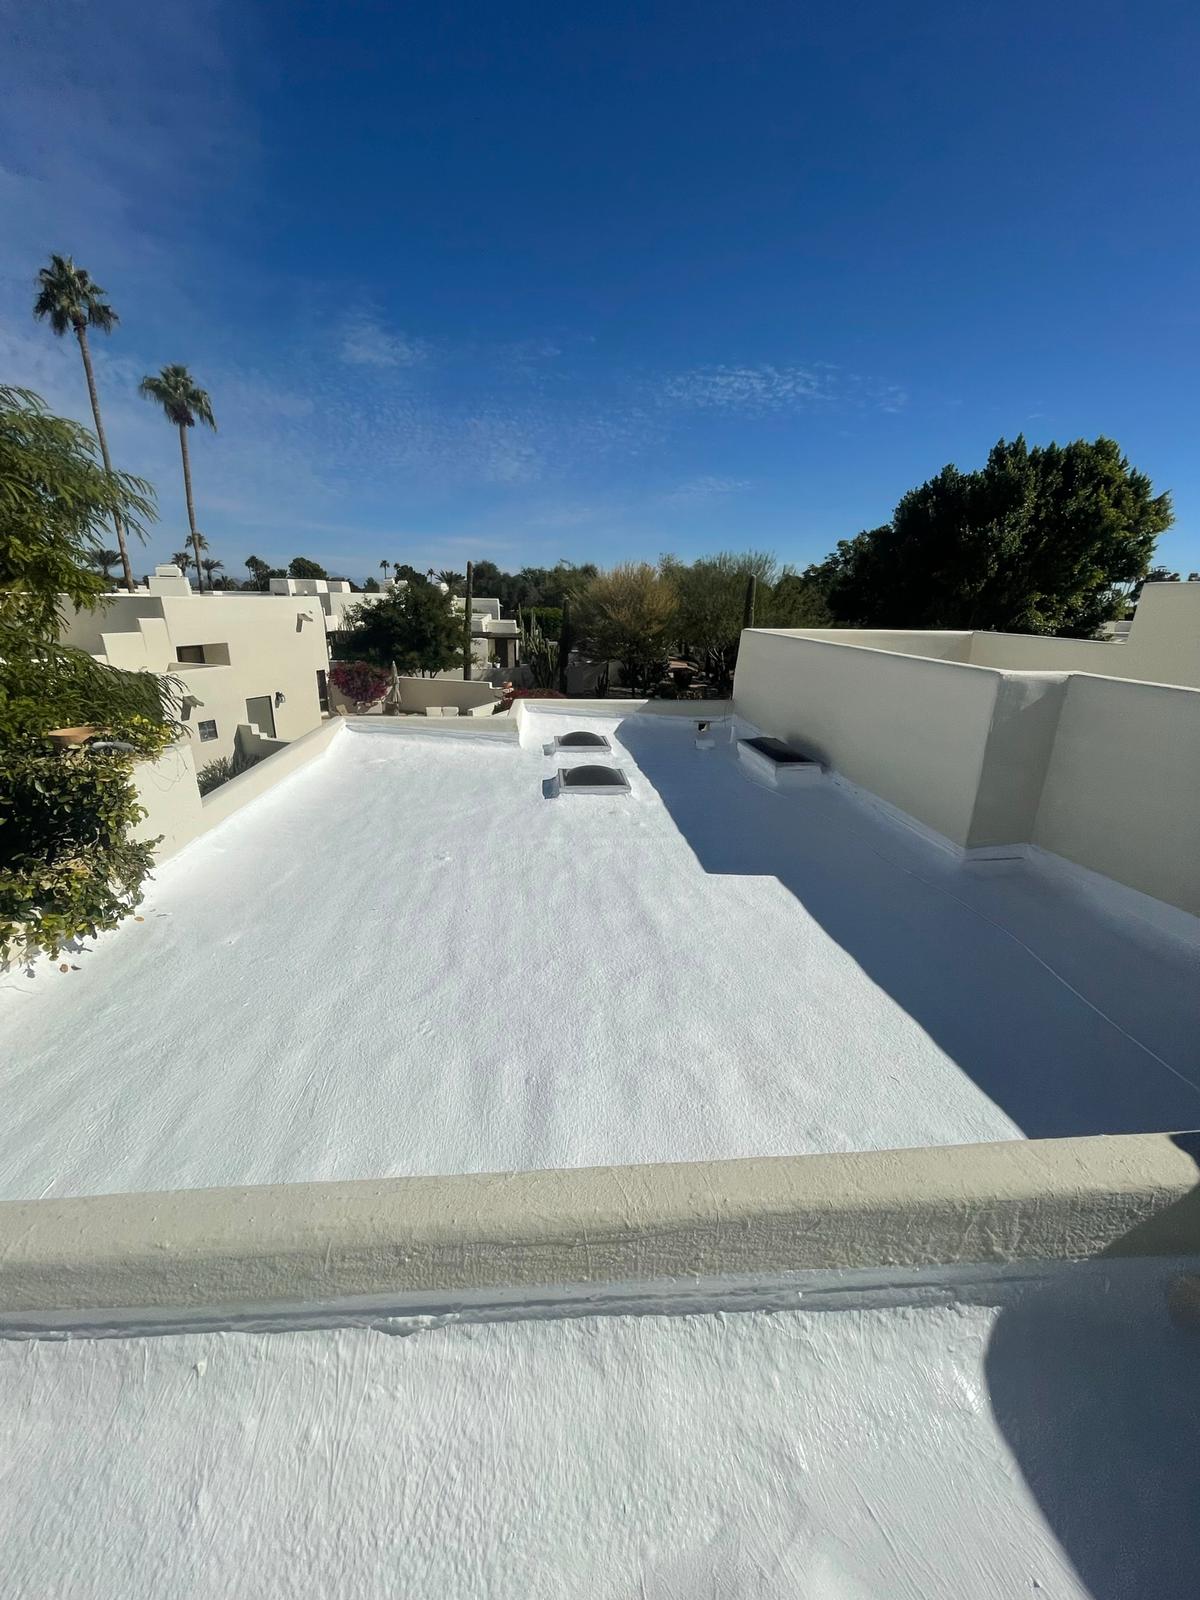 A freshly coated white roof reflects the bright sun in Whisper Rock, illustrating a high-quality spray foam installation.